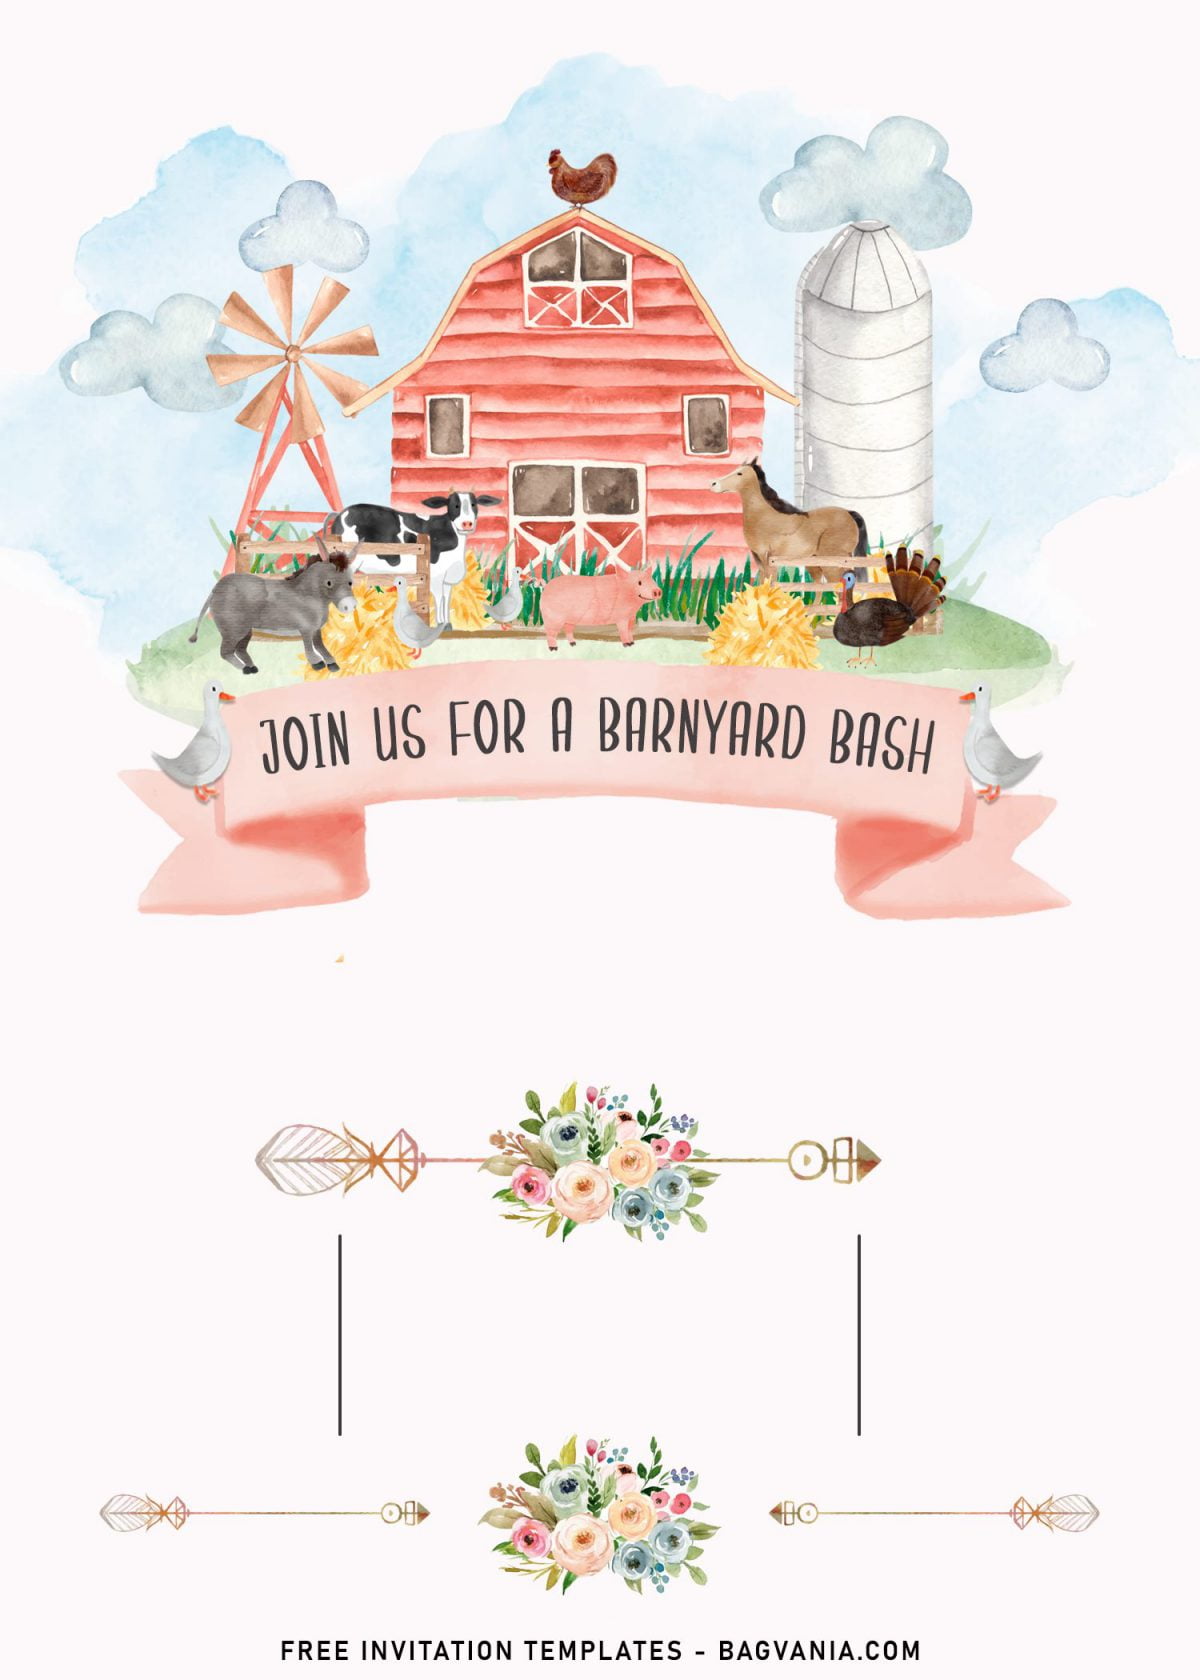 11+ Whimsical Farm Birthday Party Invitation Templates and has watercolor painting of silo